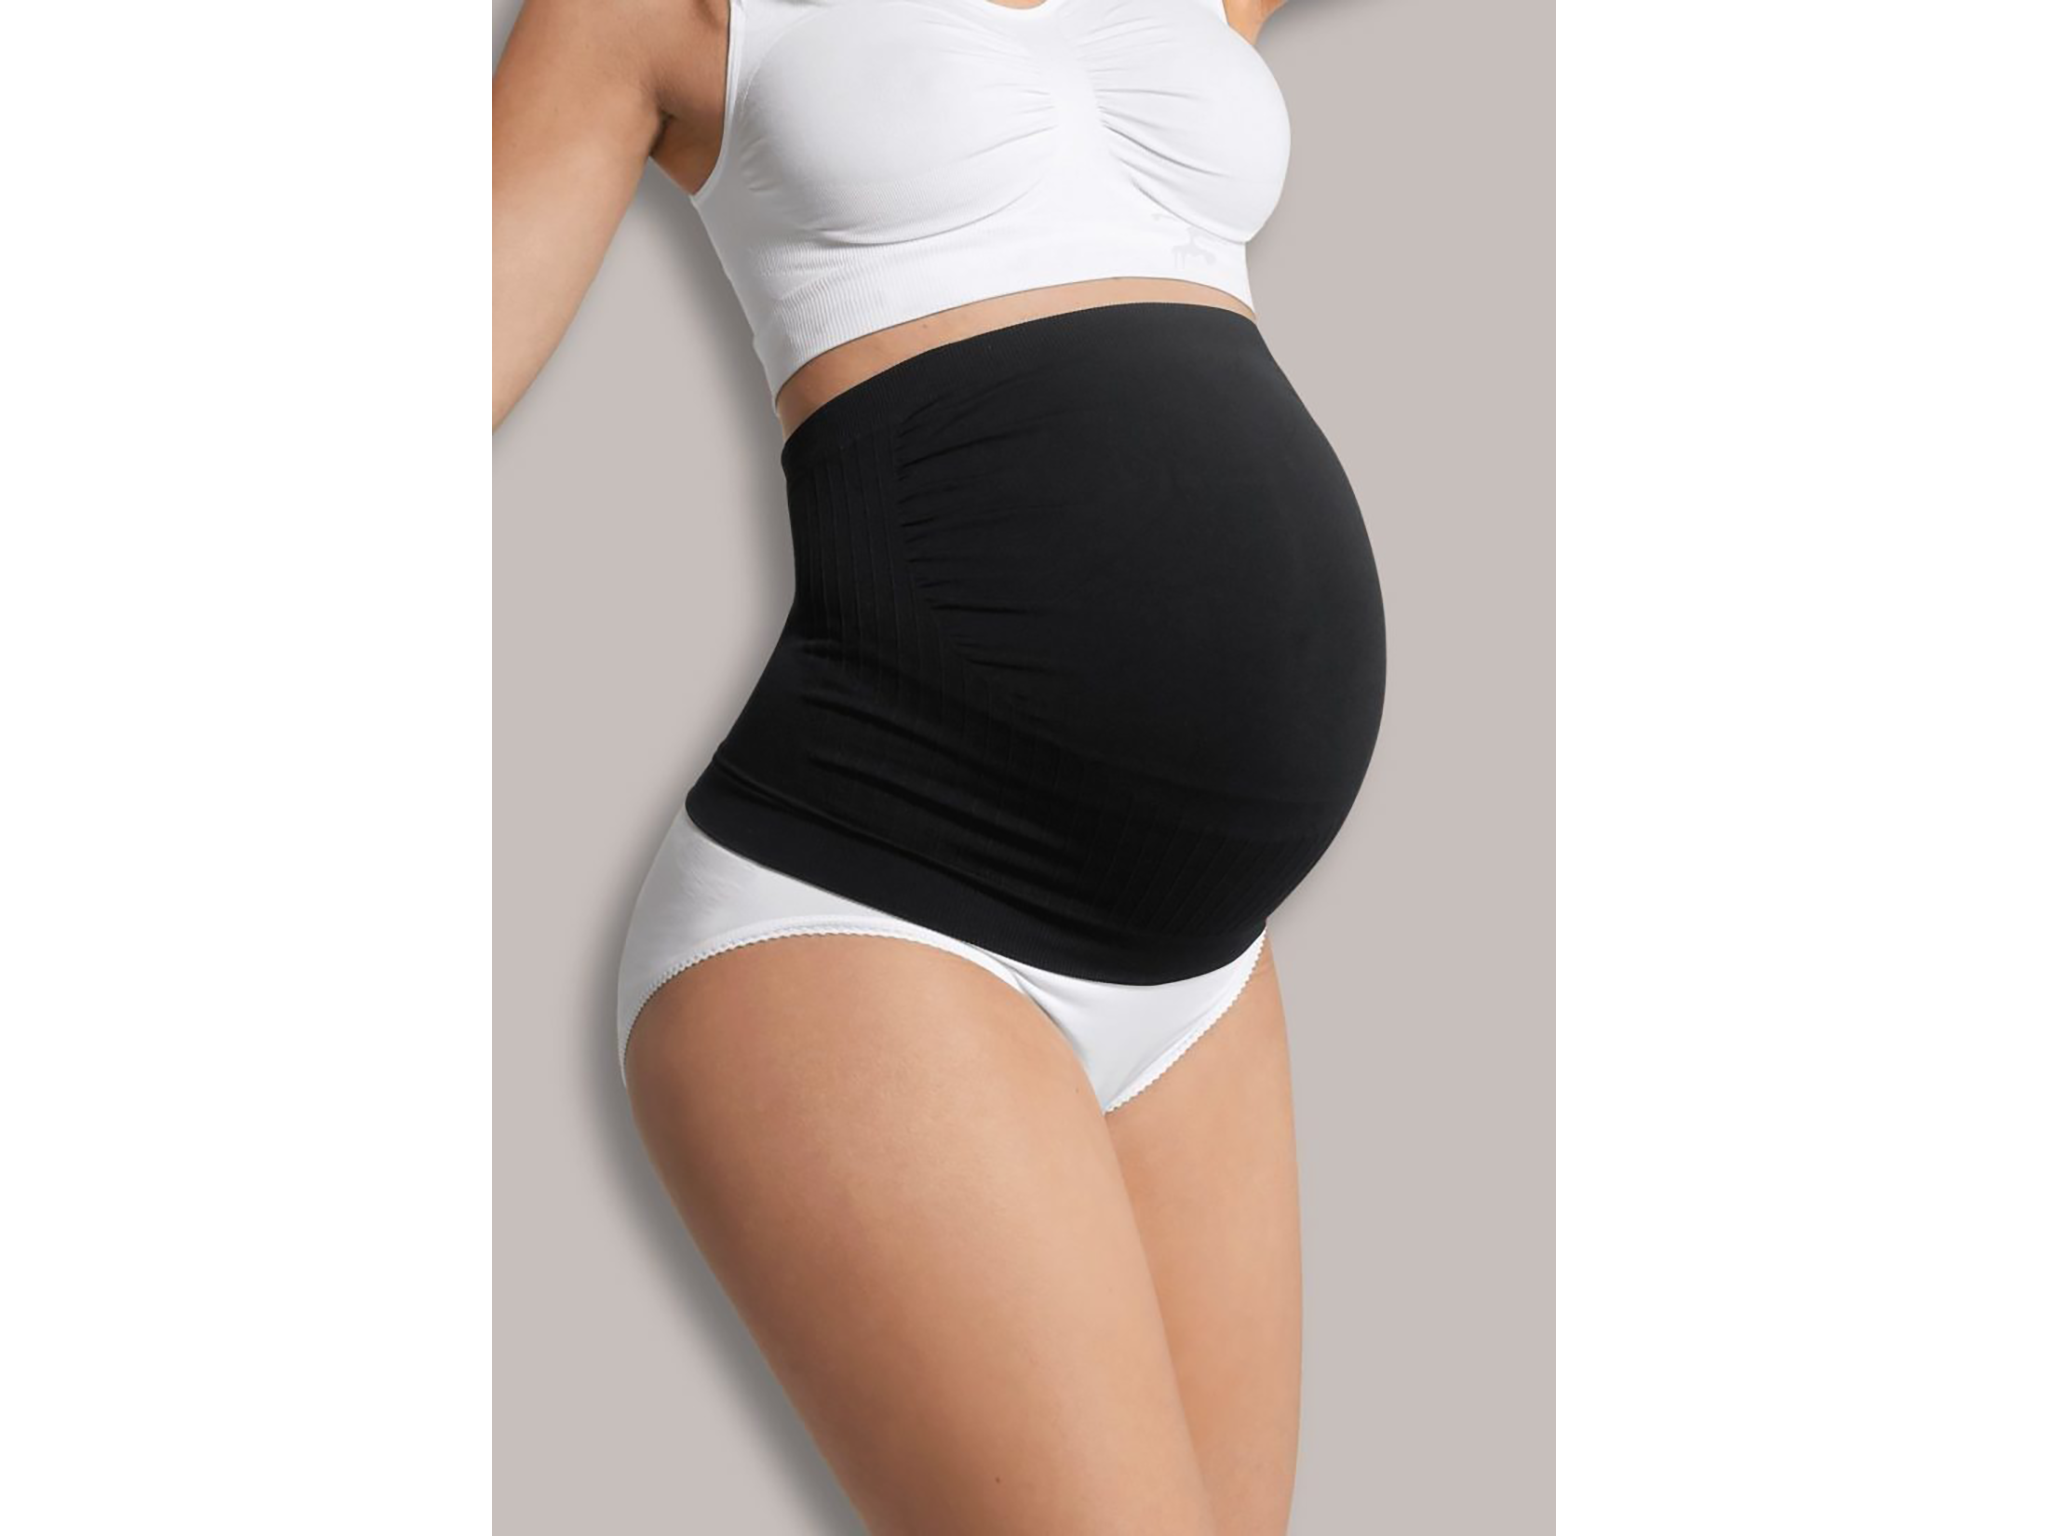 Blooming Marvellous Maternity Support Belt - bump supports